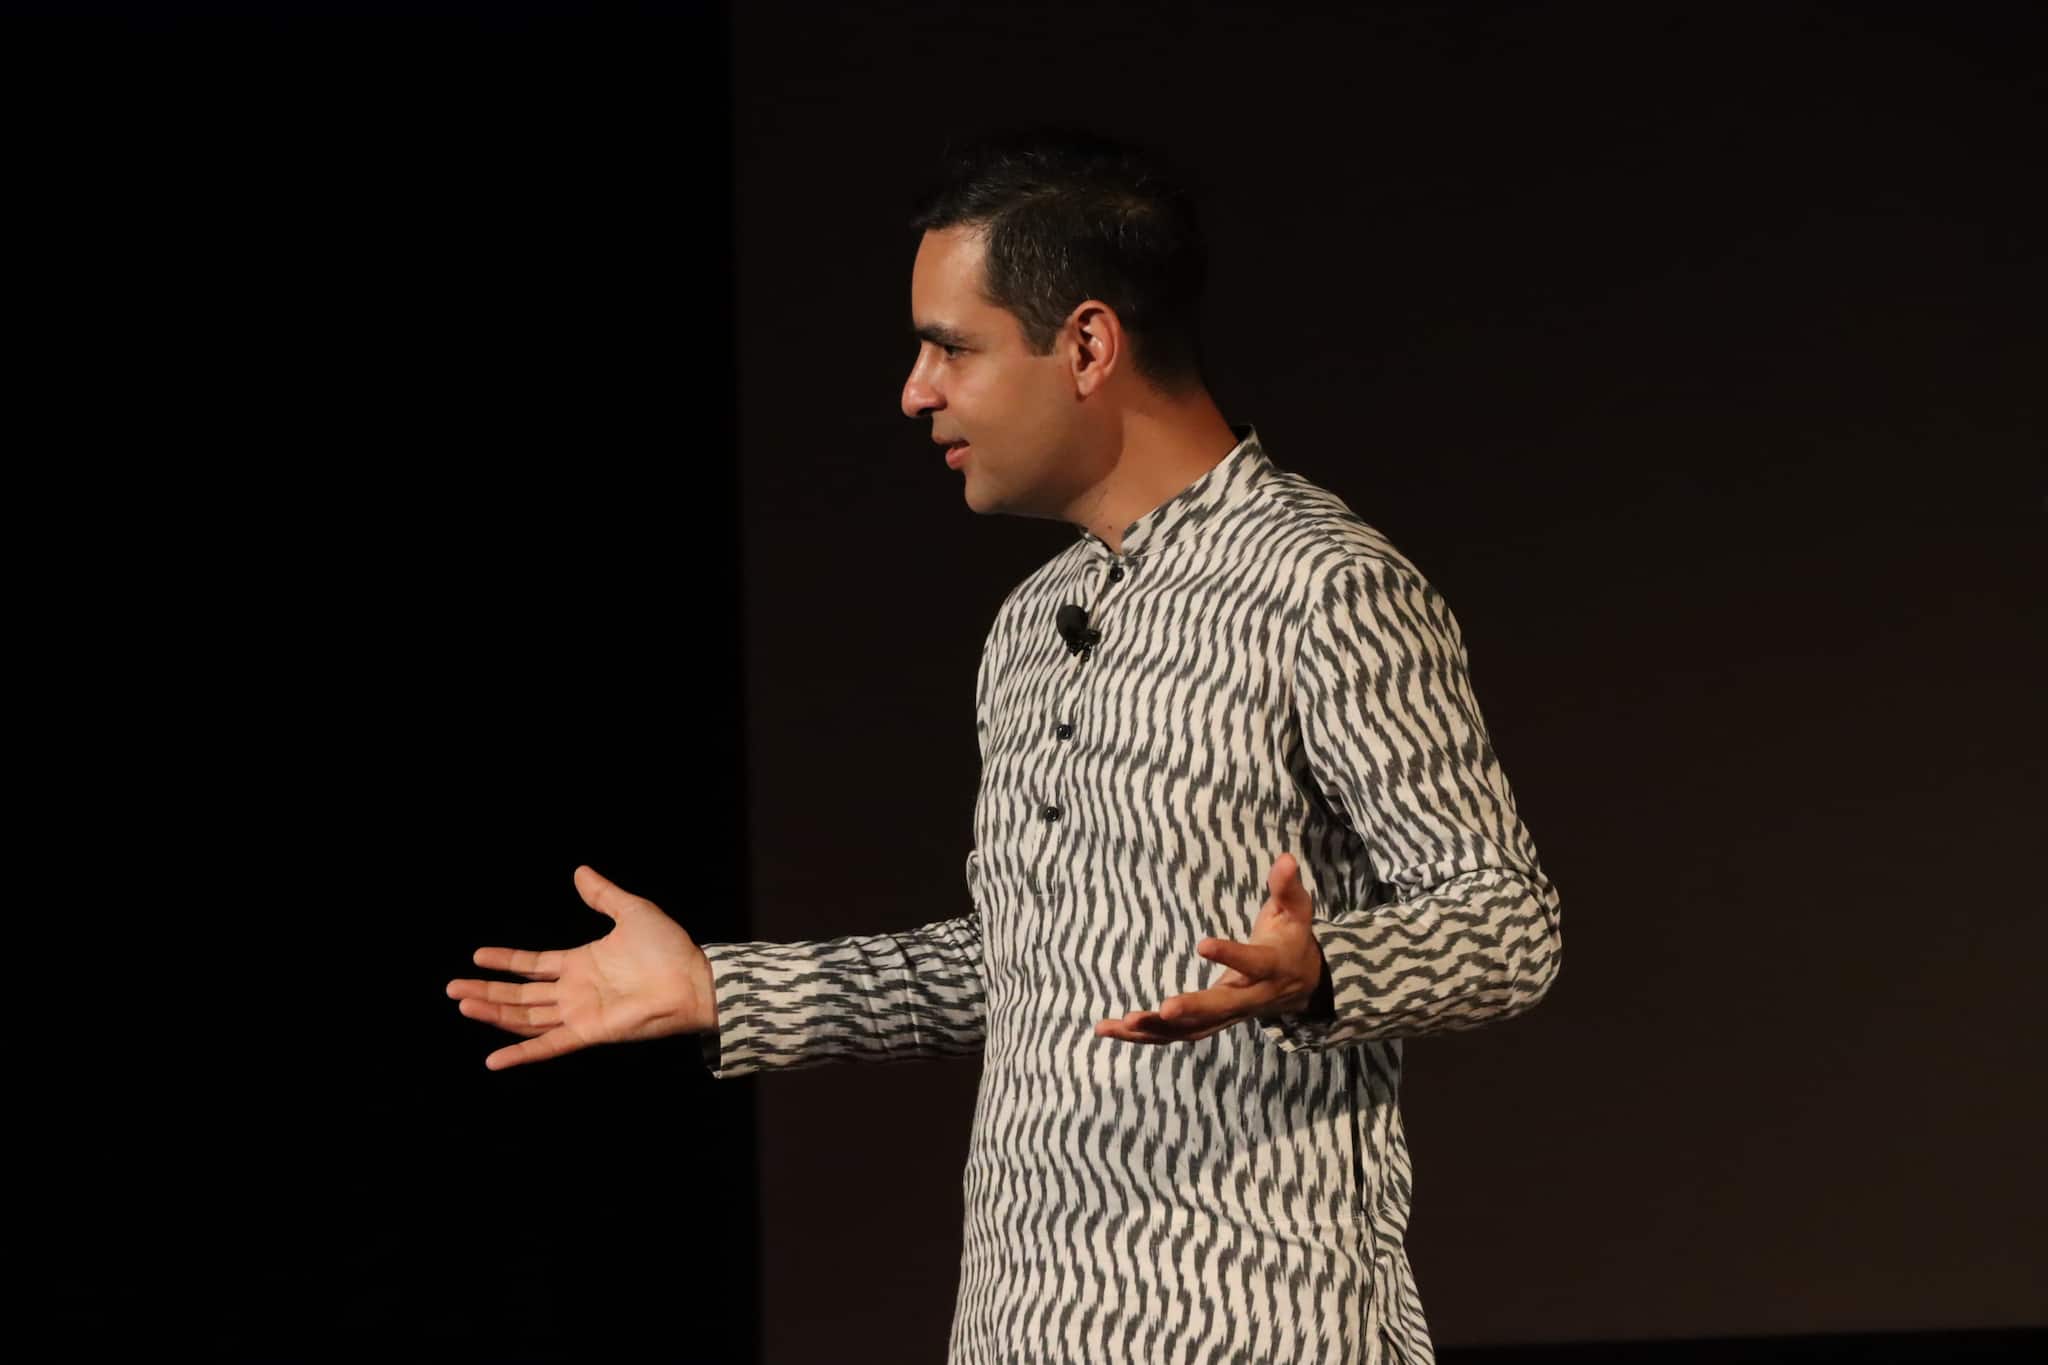 Warikoo speaking at a TEDx event